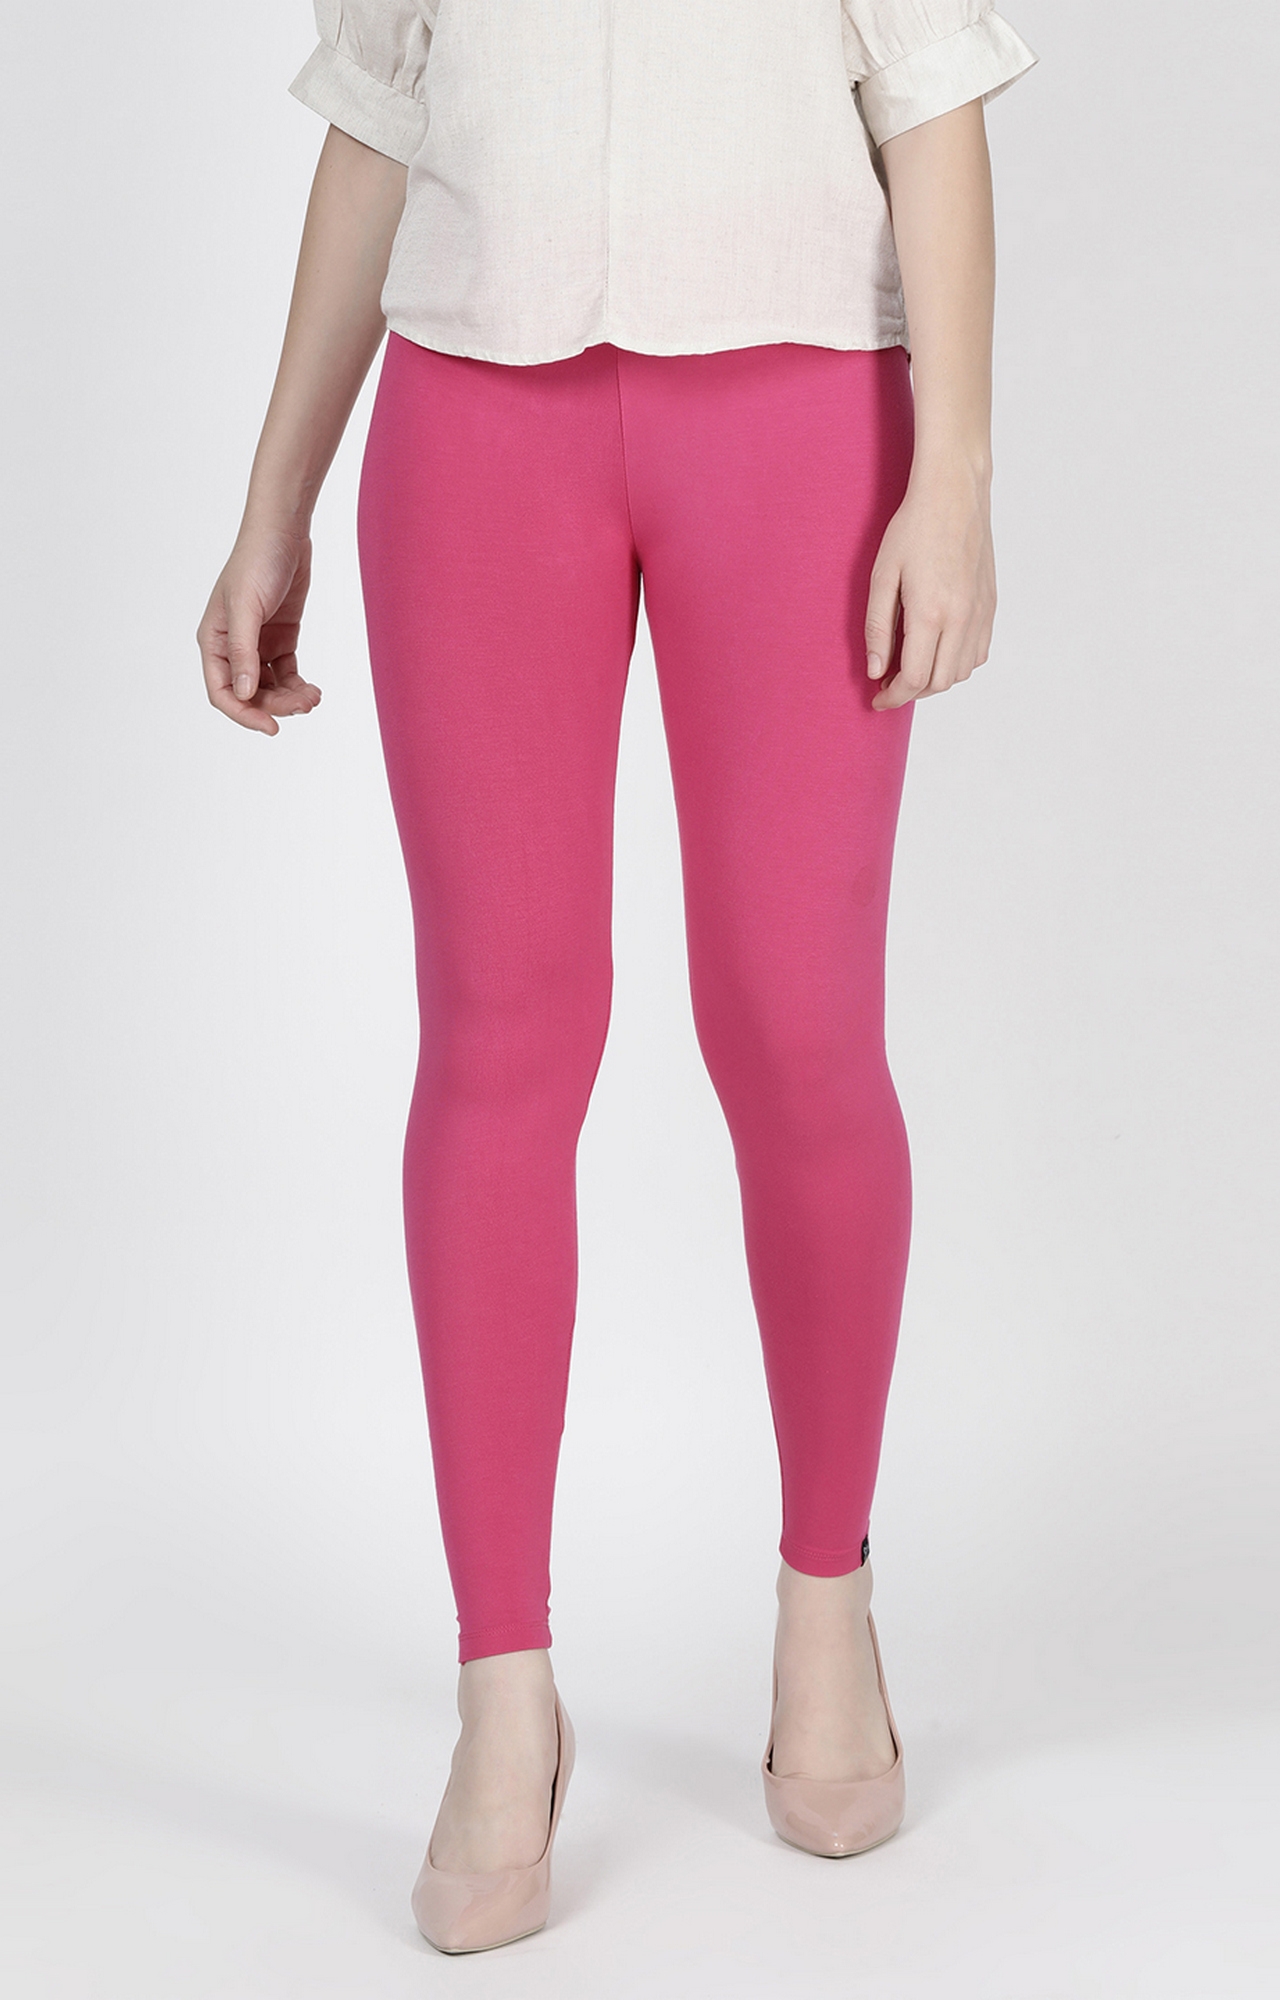 Twinbirds Pink Shock Solid Ankle Legging